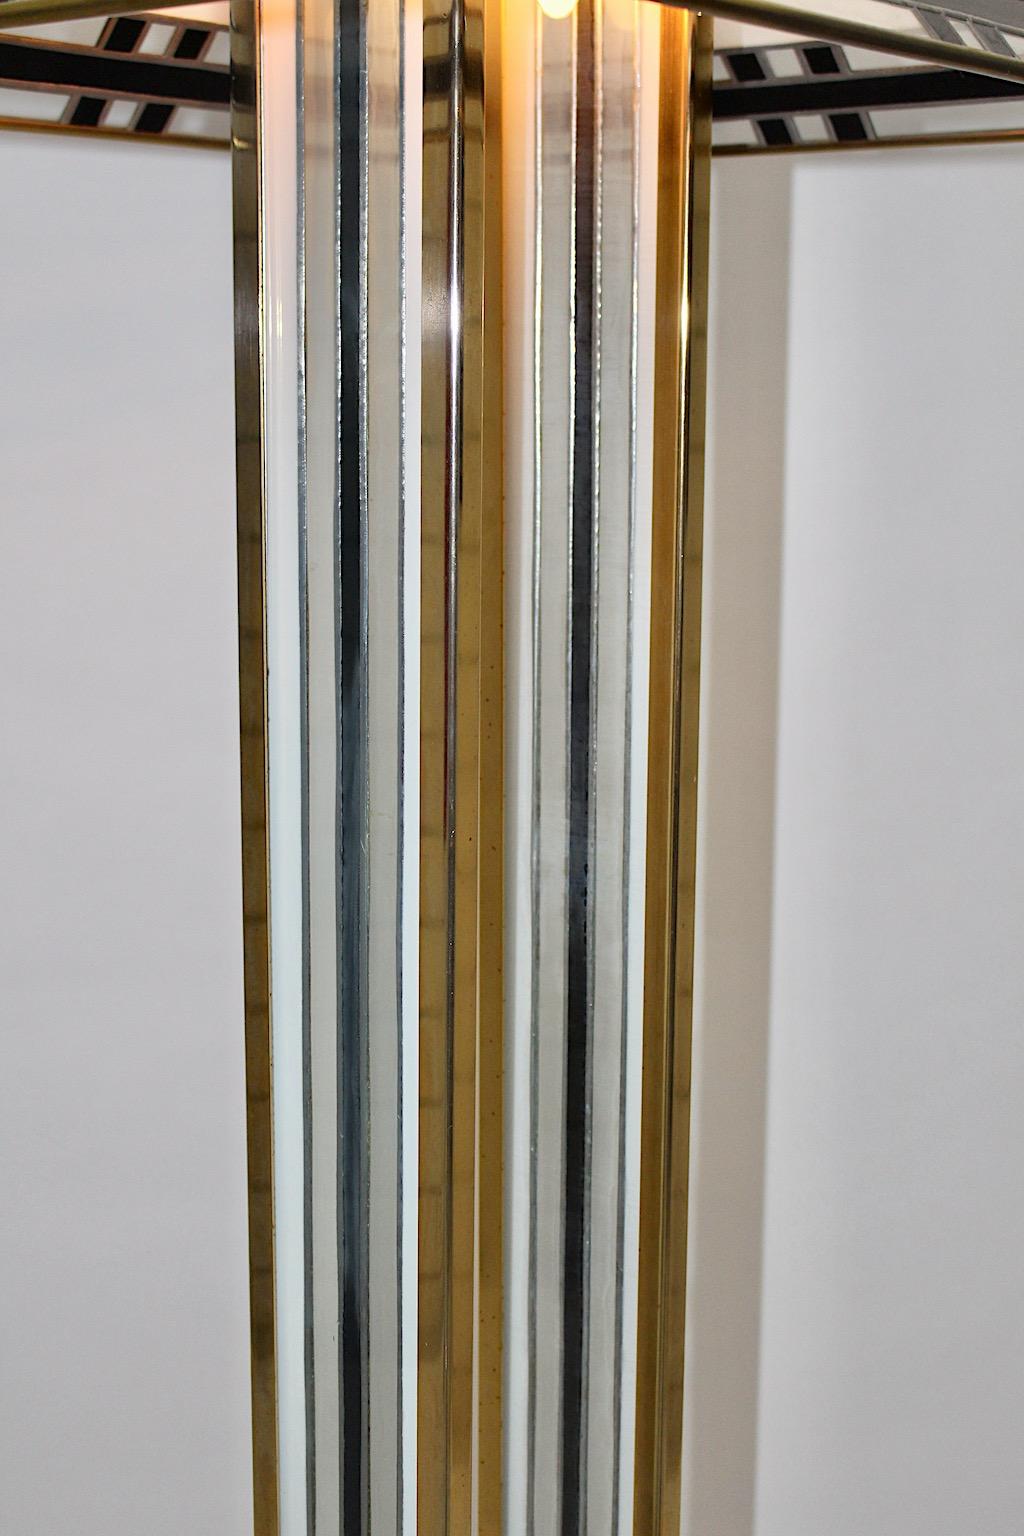 Modern Metal Lucite Vintage Floor Lamp Albano Poli for Poliarte, 1970s, Italy For Sale 10